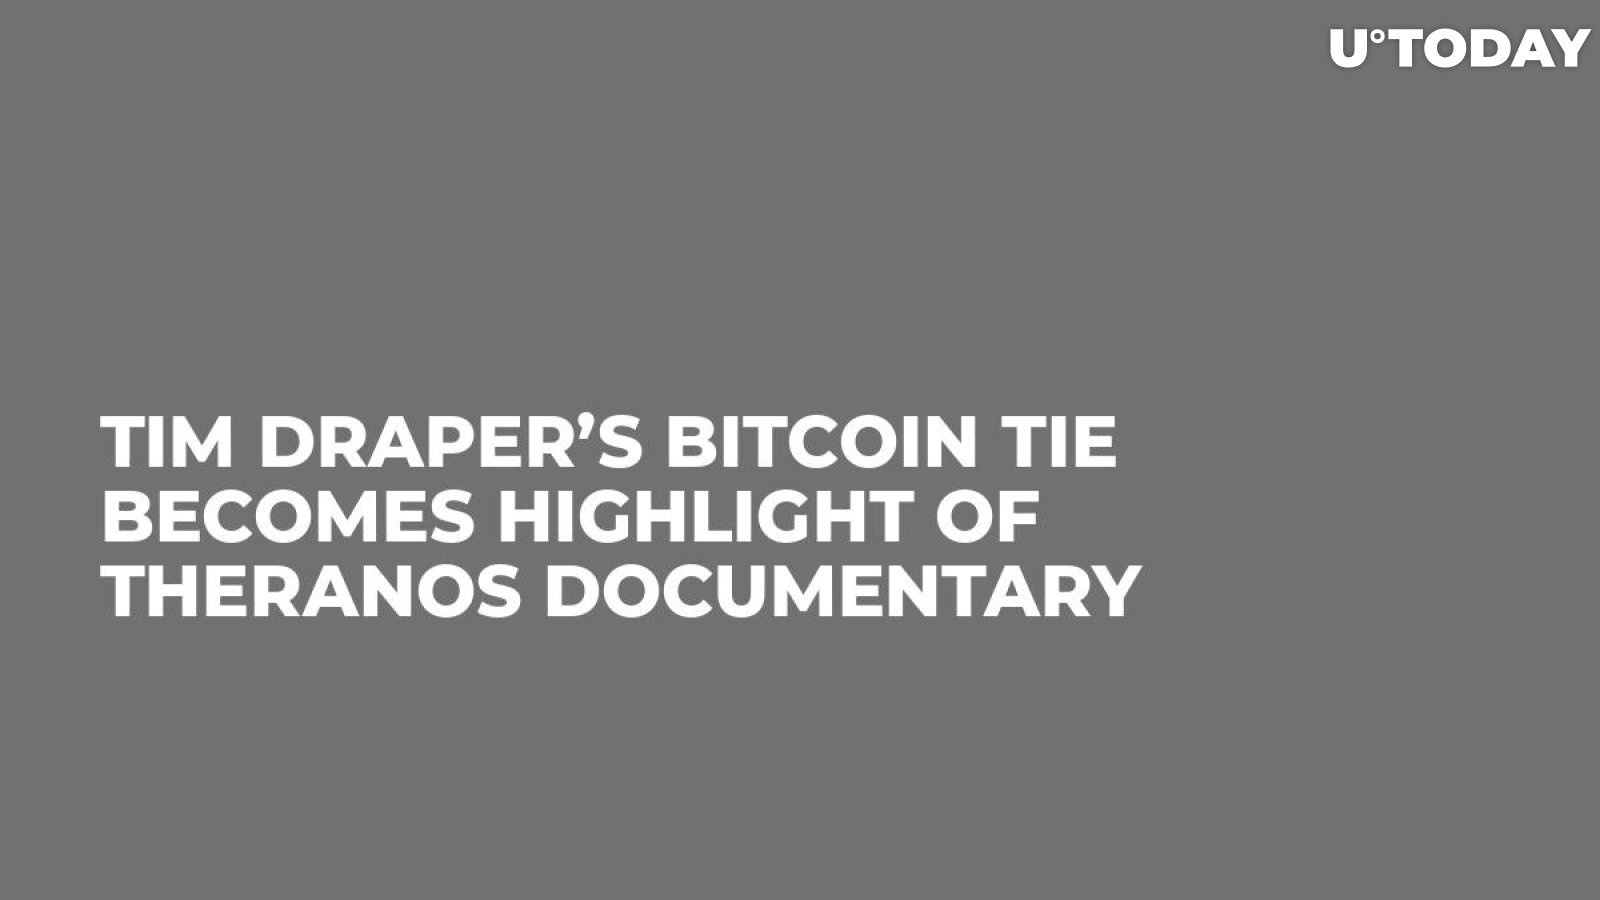 Tim Draper’s Bitcoin Tie Becomes Highlight of Theranos Documentary